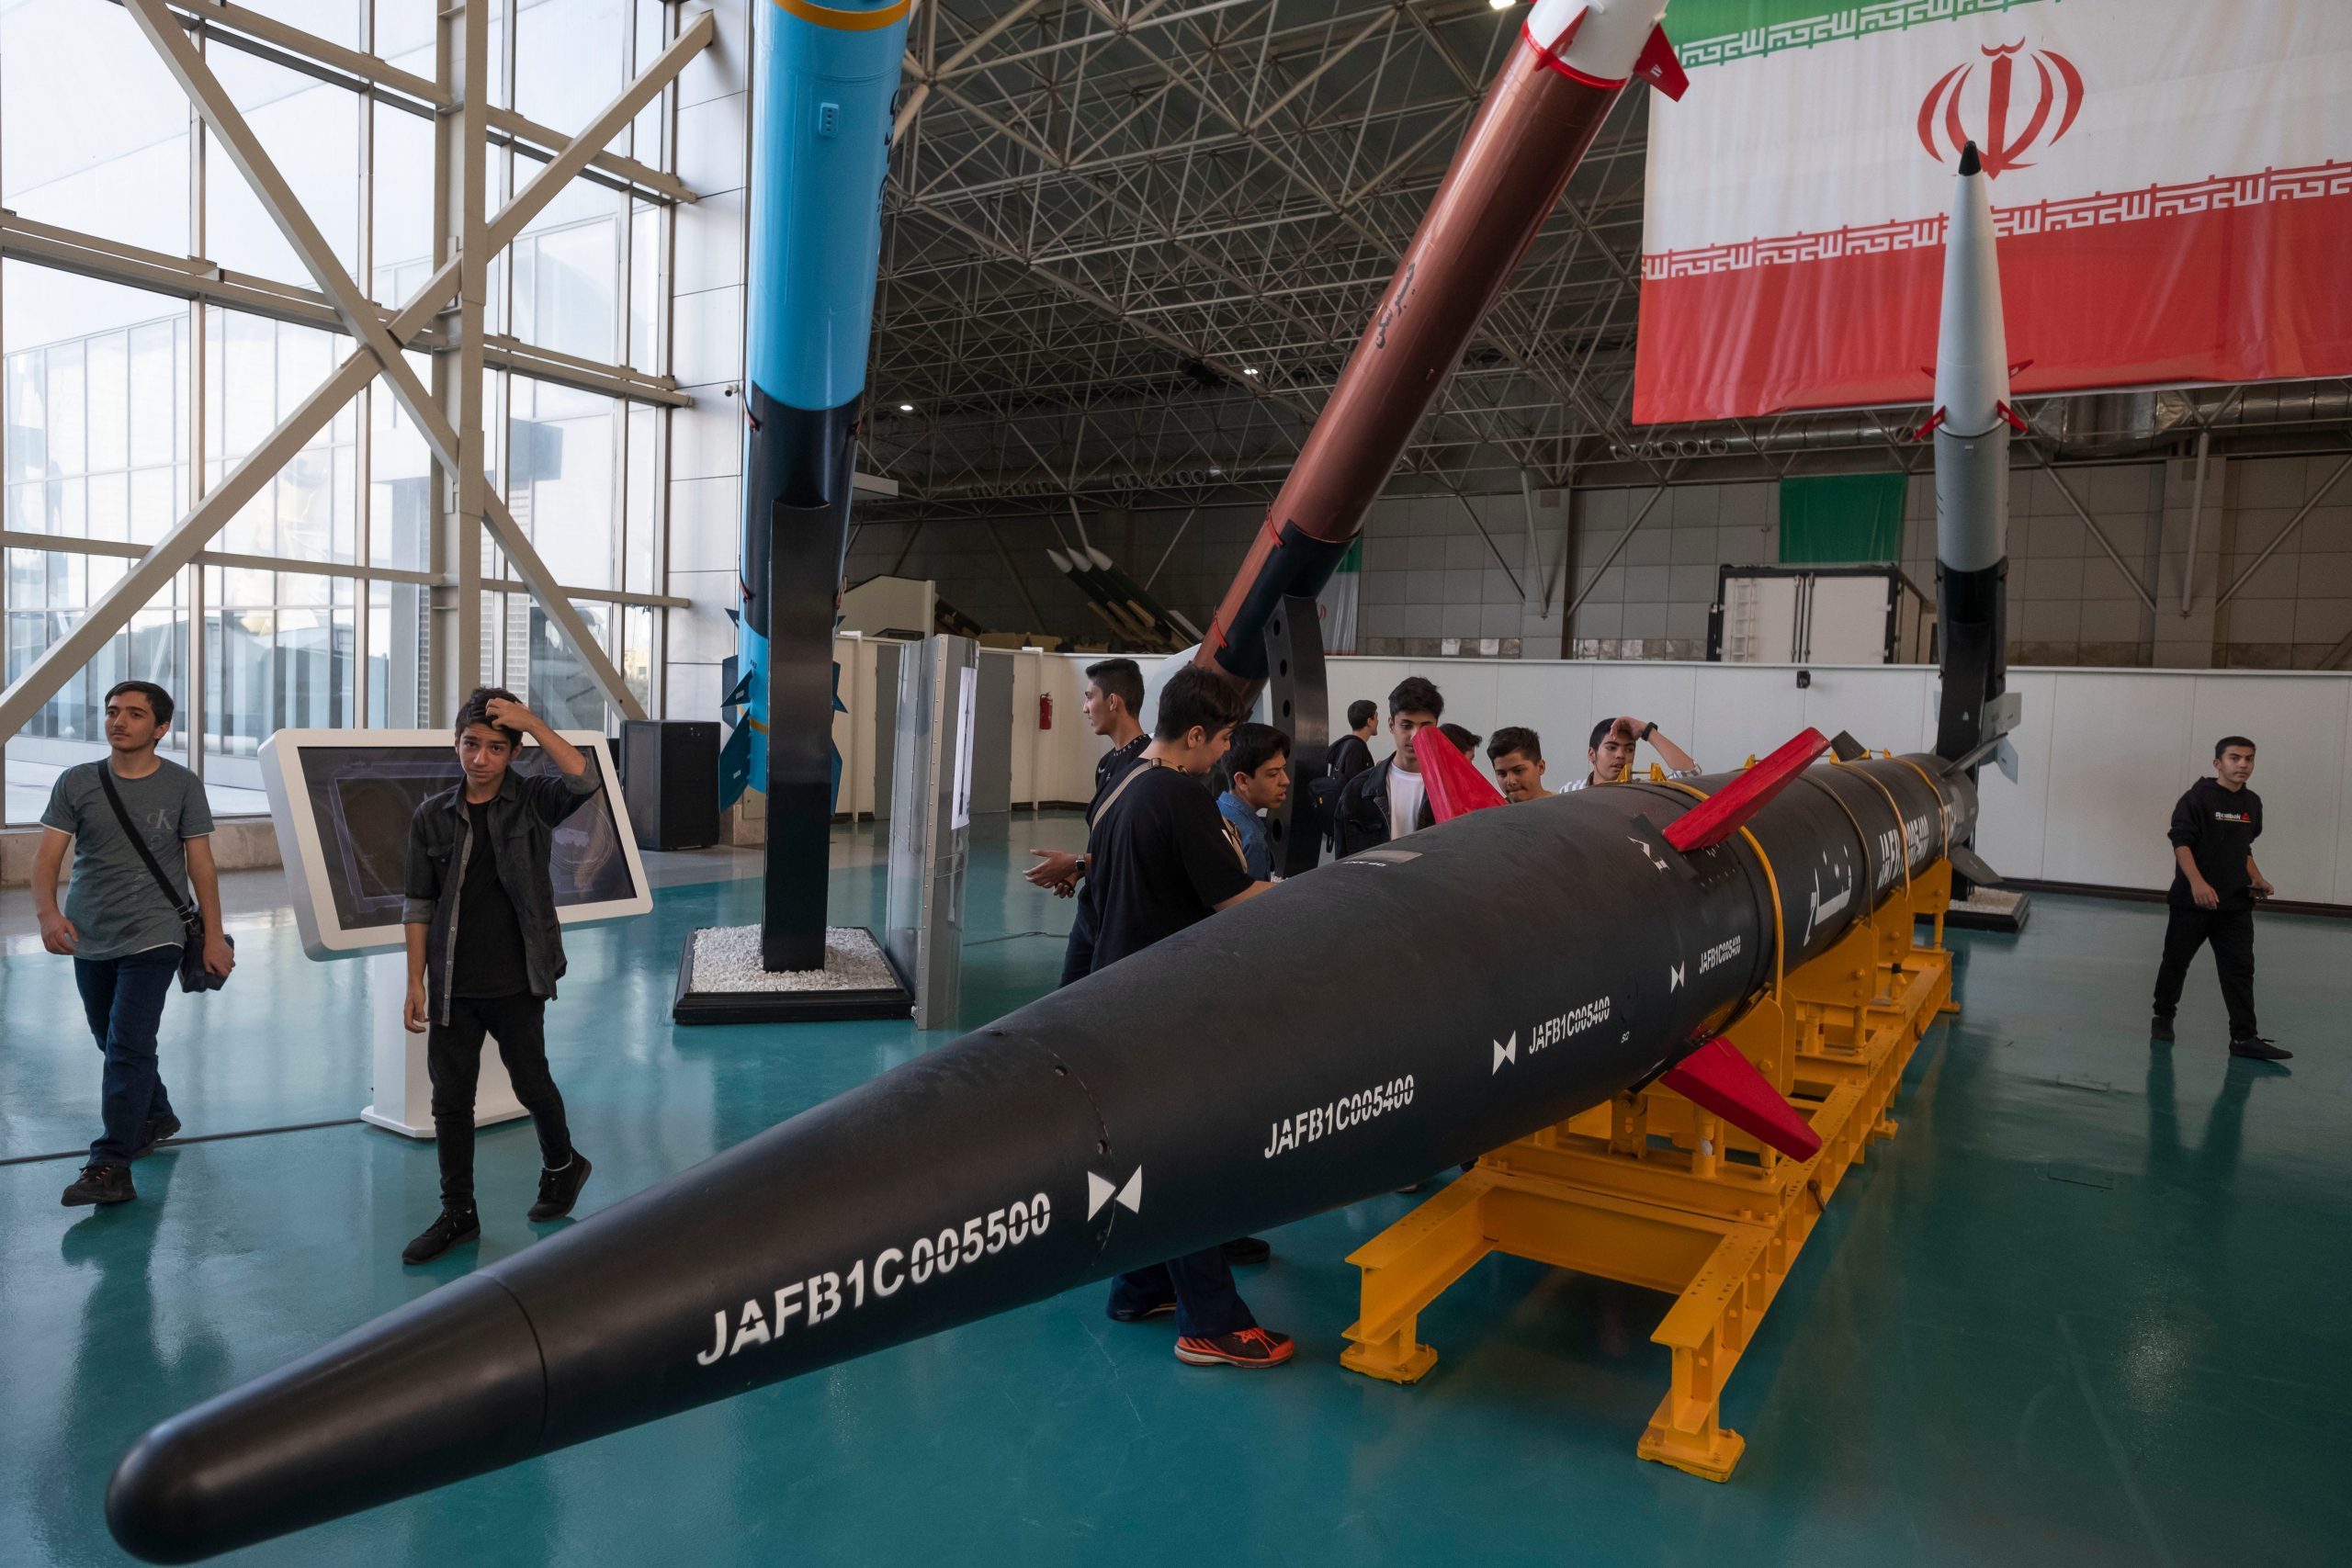 Iran unveils new hypersonic missile weapon, allegedly matching US, China capabilities